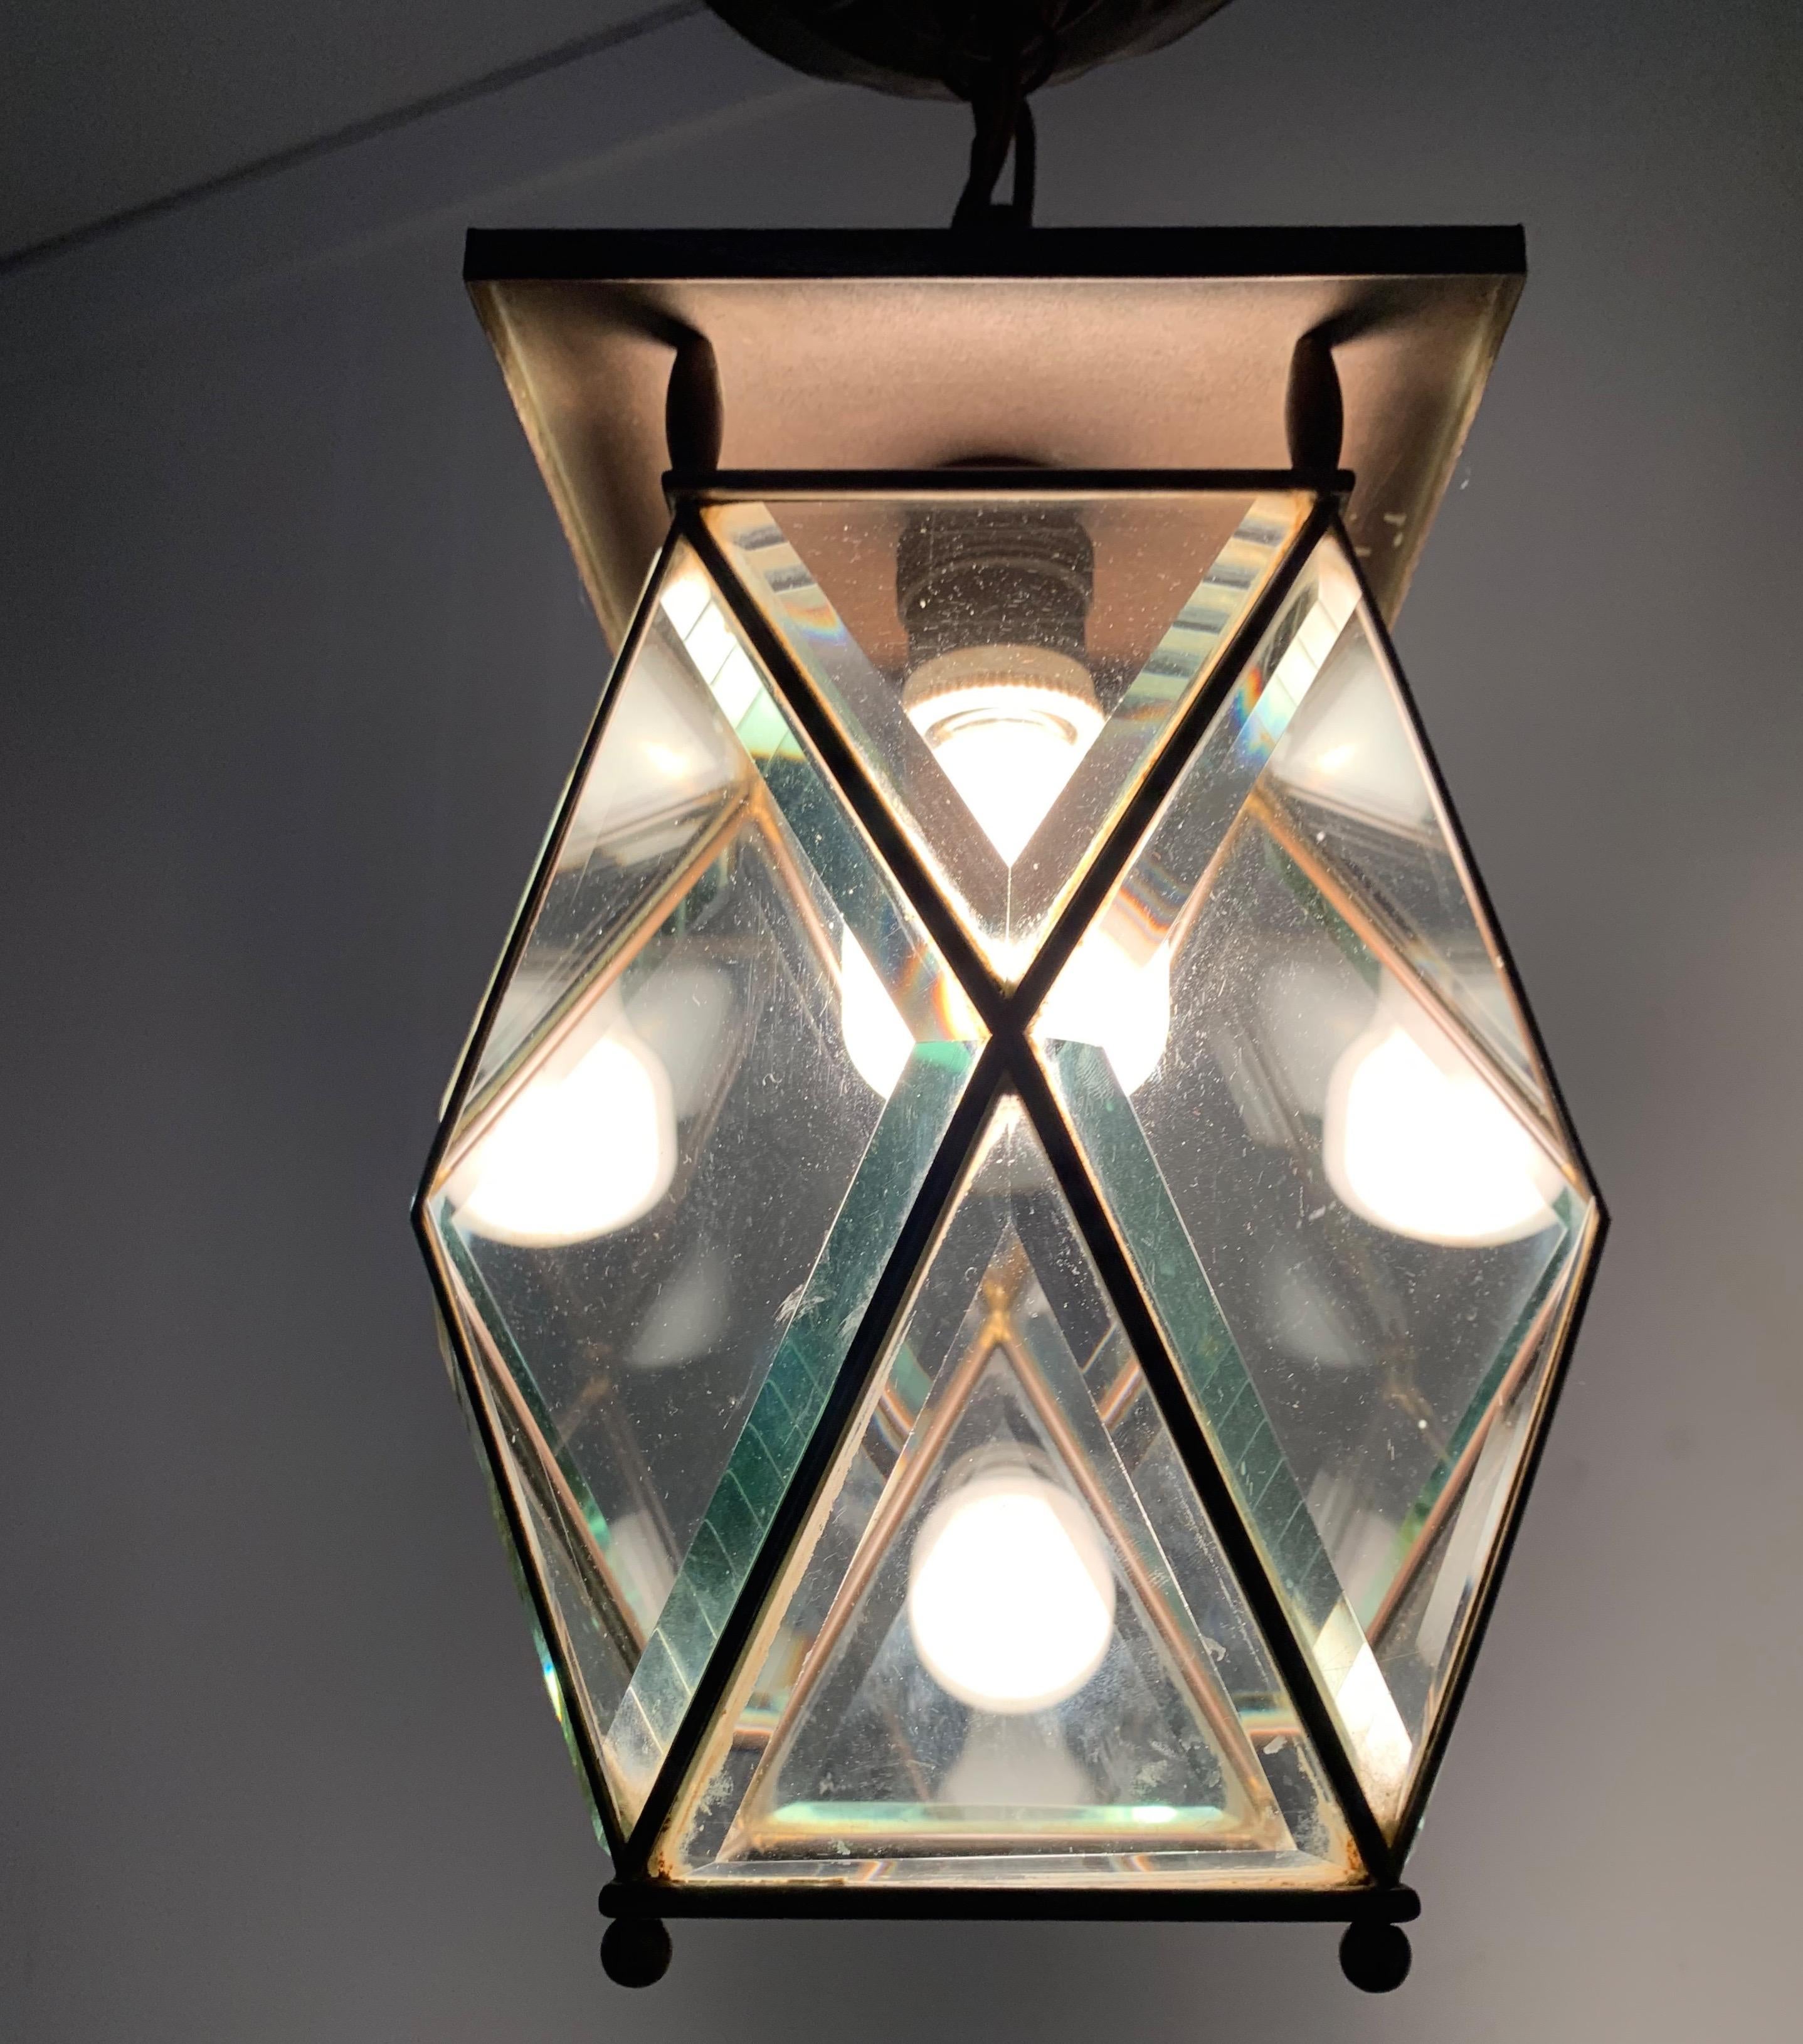 Museum quality and condition, single light pendant from the early 1900s.

If you are looking for a great quality and stylish light fixture to grace your living space then this early 20th century pendant could be perfect. Mounted on the ceiling of